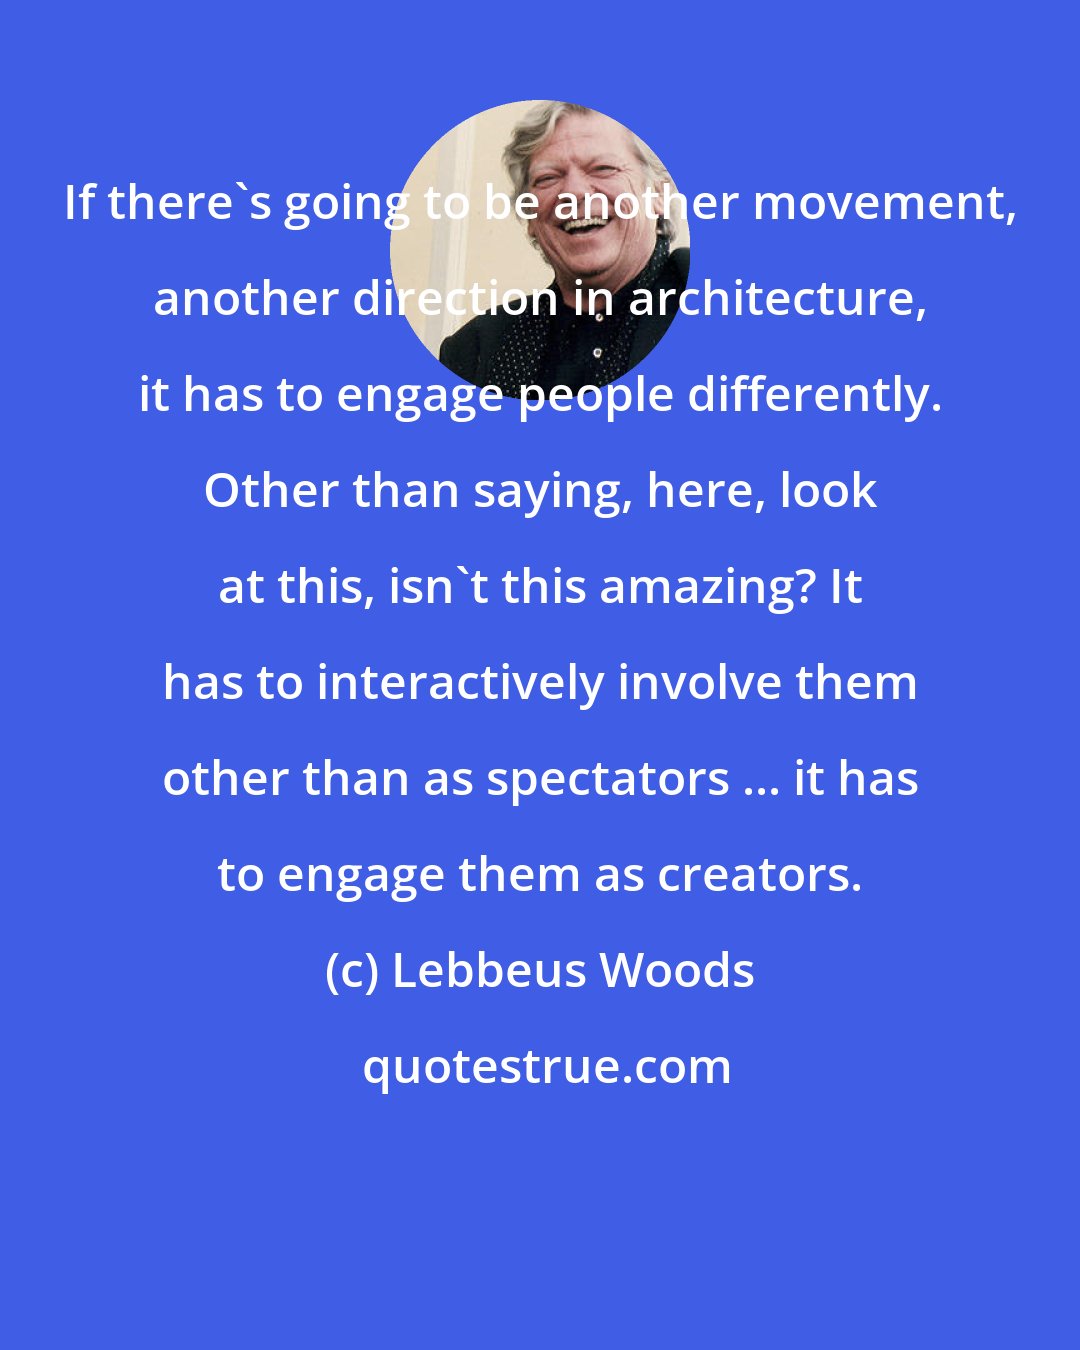 Lebbeus Woods: If there's going to be another movement, another direction in architecture, it has to engage people differently. Other than saying, here, look at this, isn't this amazing? It has to interactively involve them other than as spectators ... it has to engage them as creators.